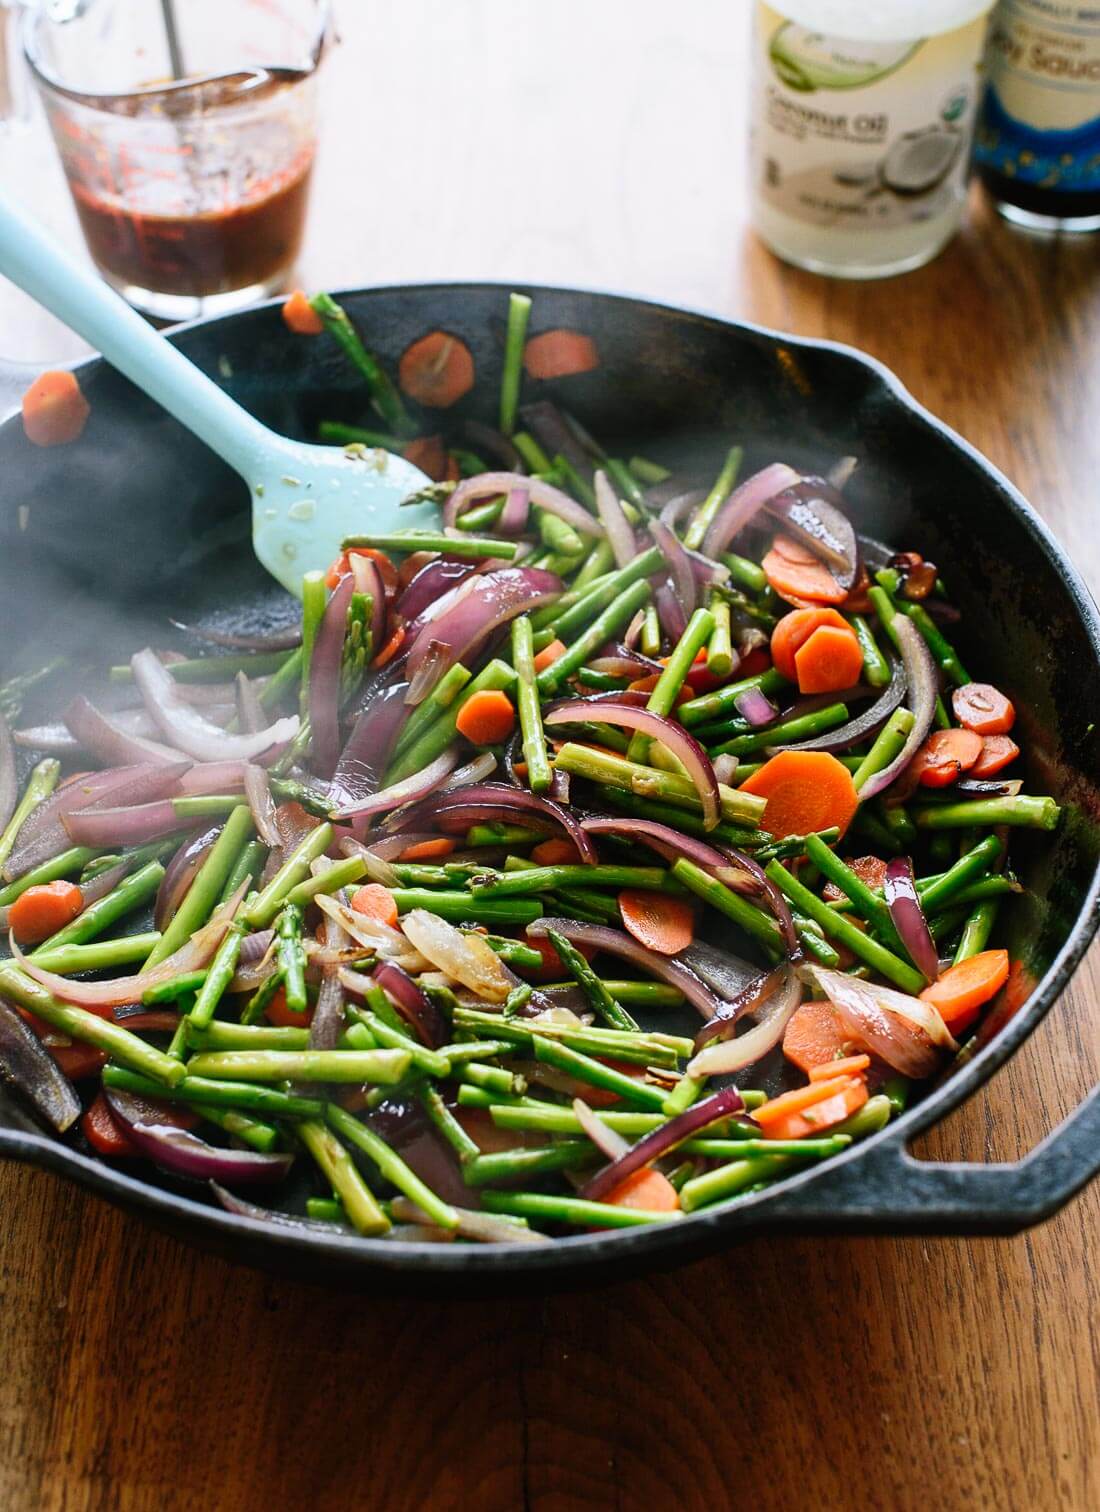 This vegetable stir-fry recipe comes together in no time!  To make this side dish a complete meal, serve it with brown rice and your protein of choice.